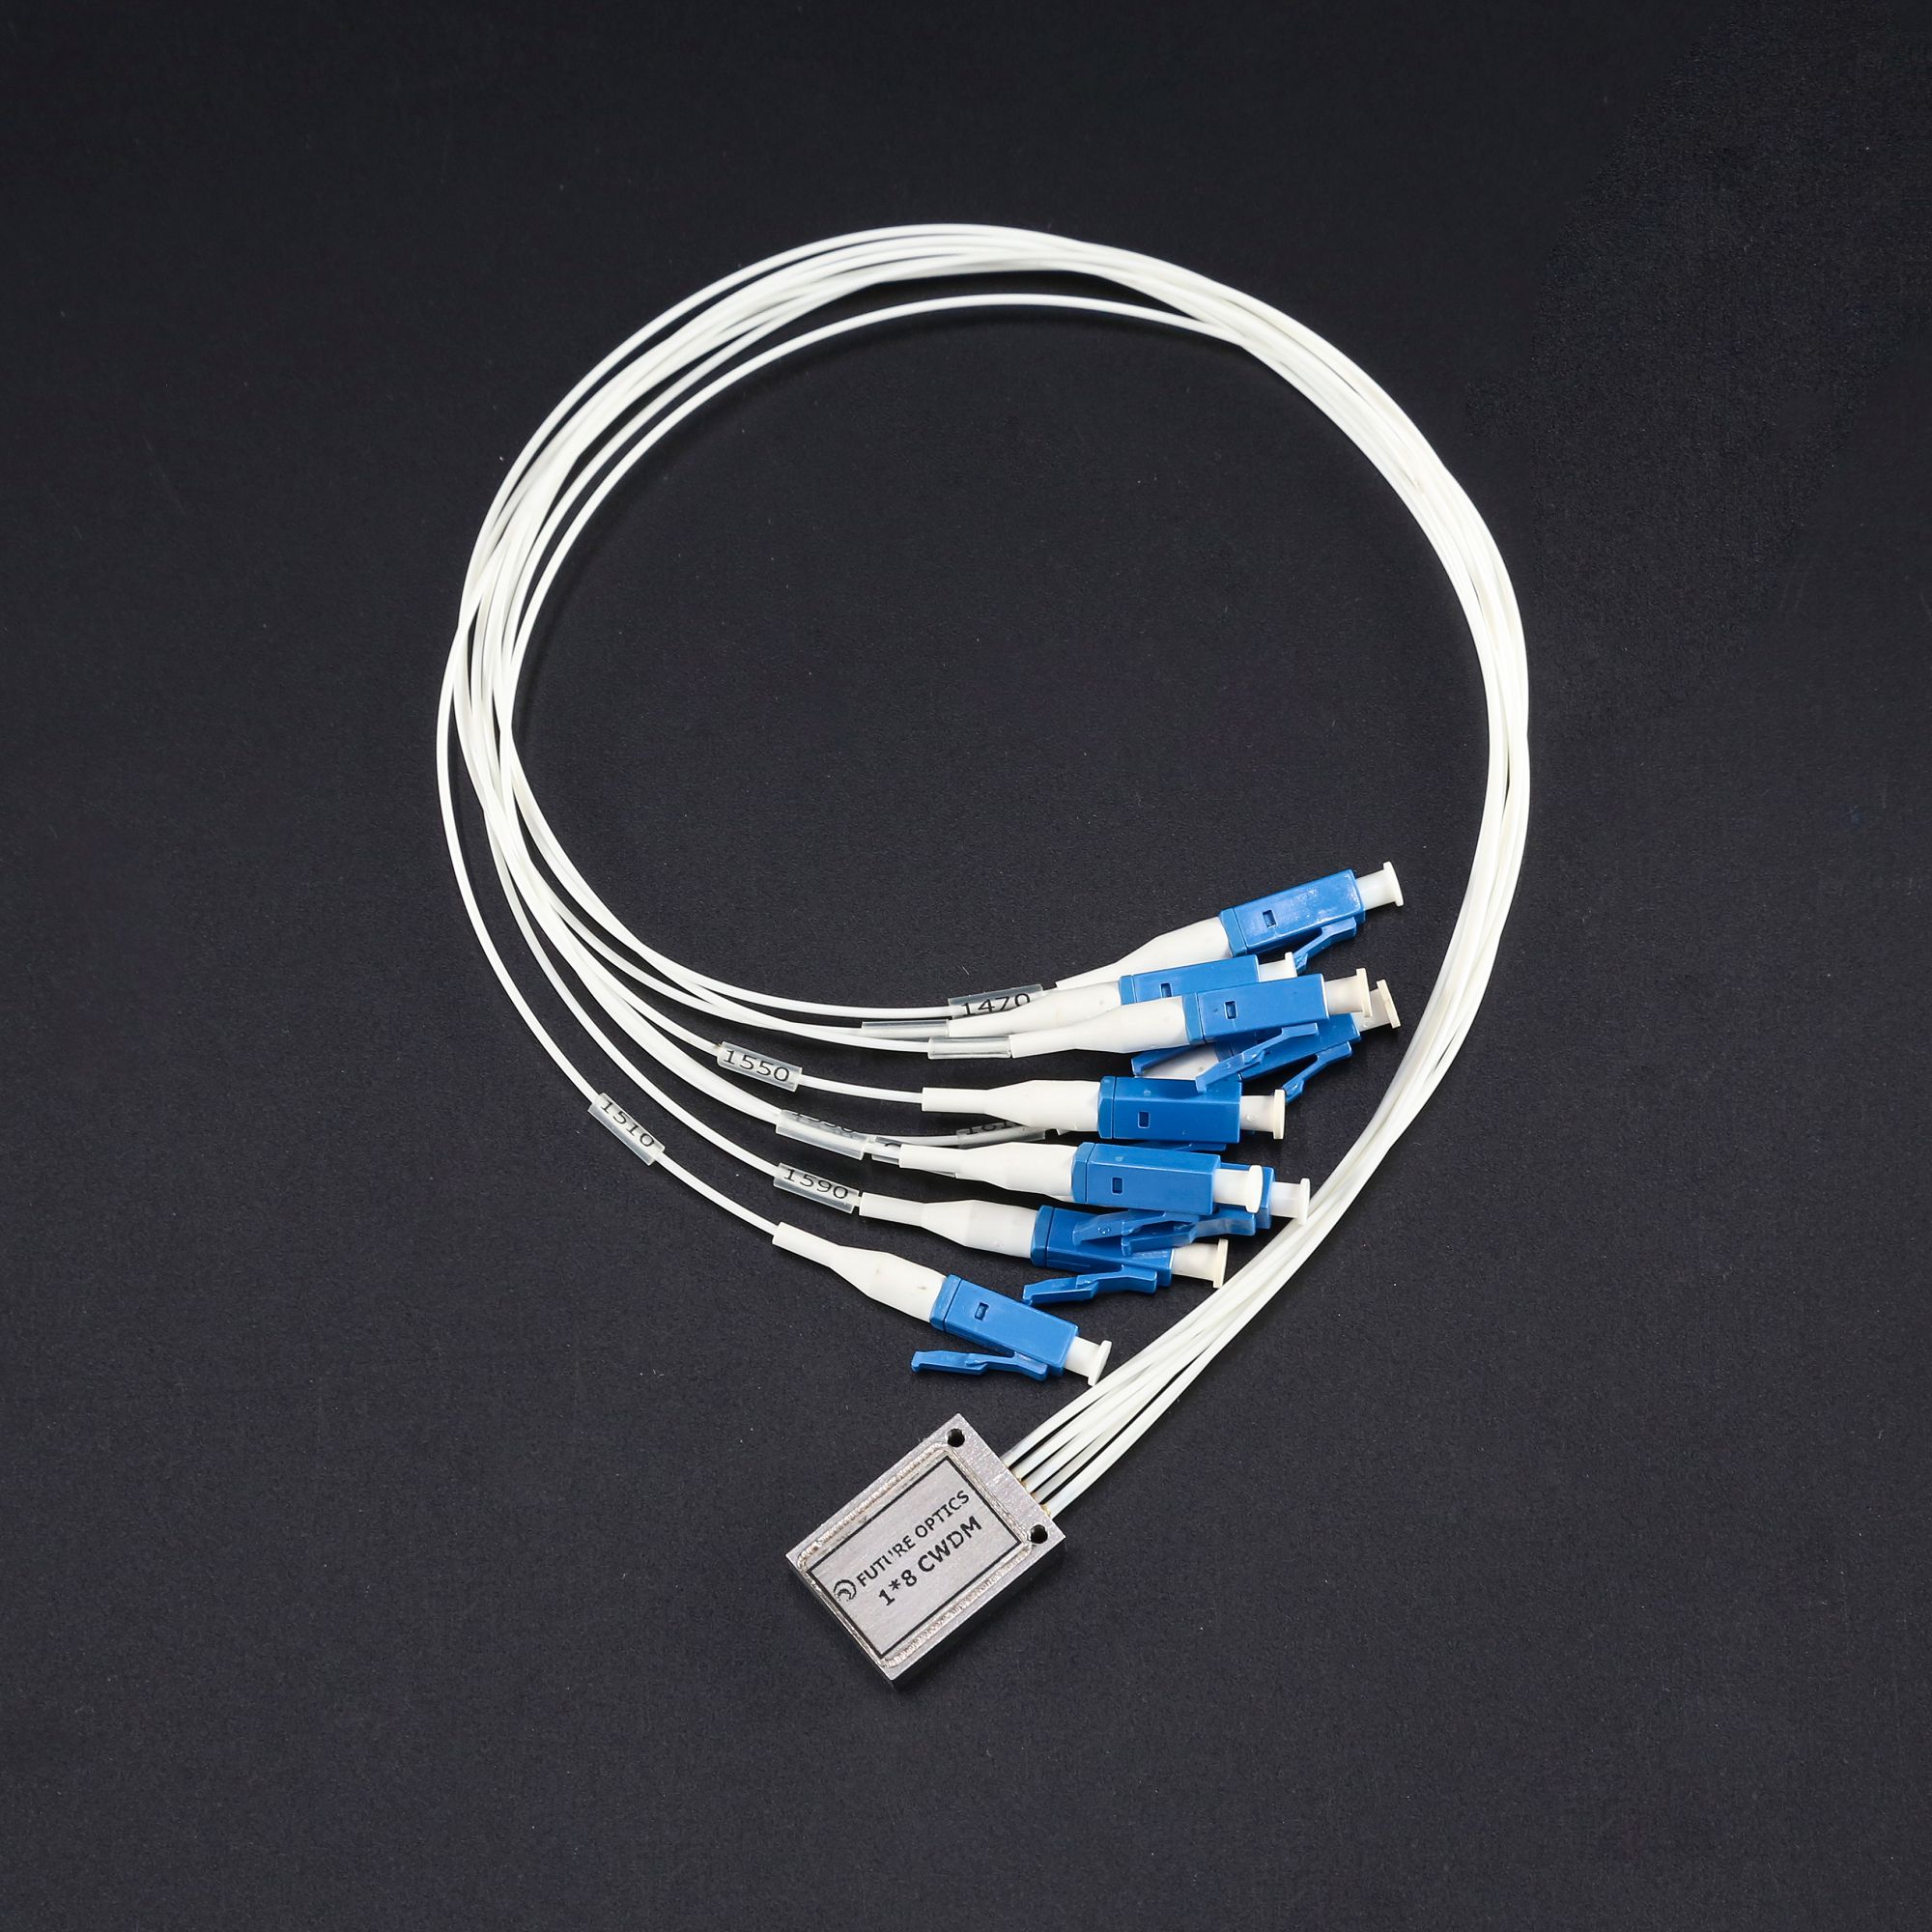 8 Channels 1271-1411nm,Unilateral fiber outlet, High Density,1.2dB Typical IL, L